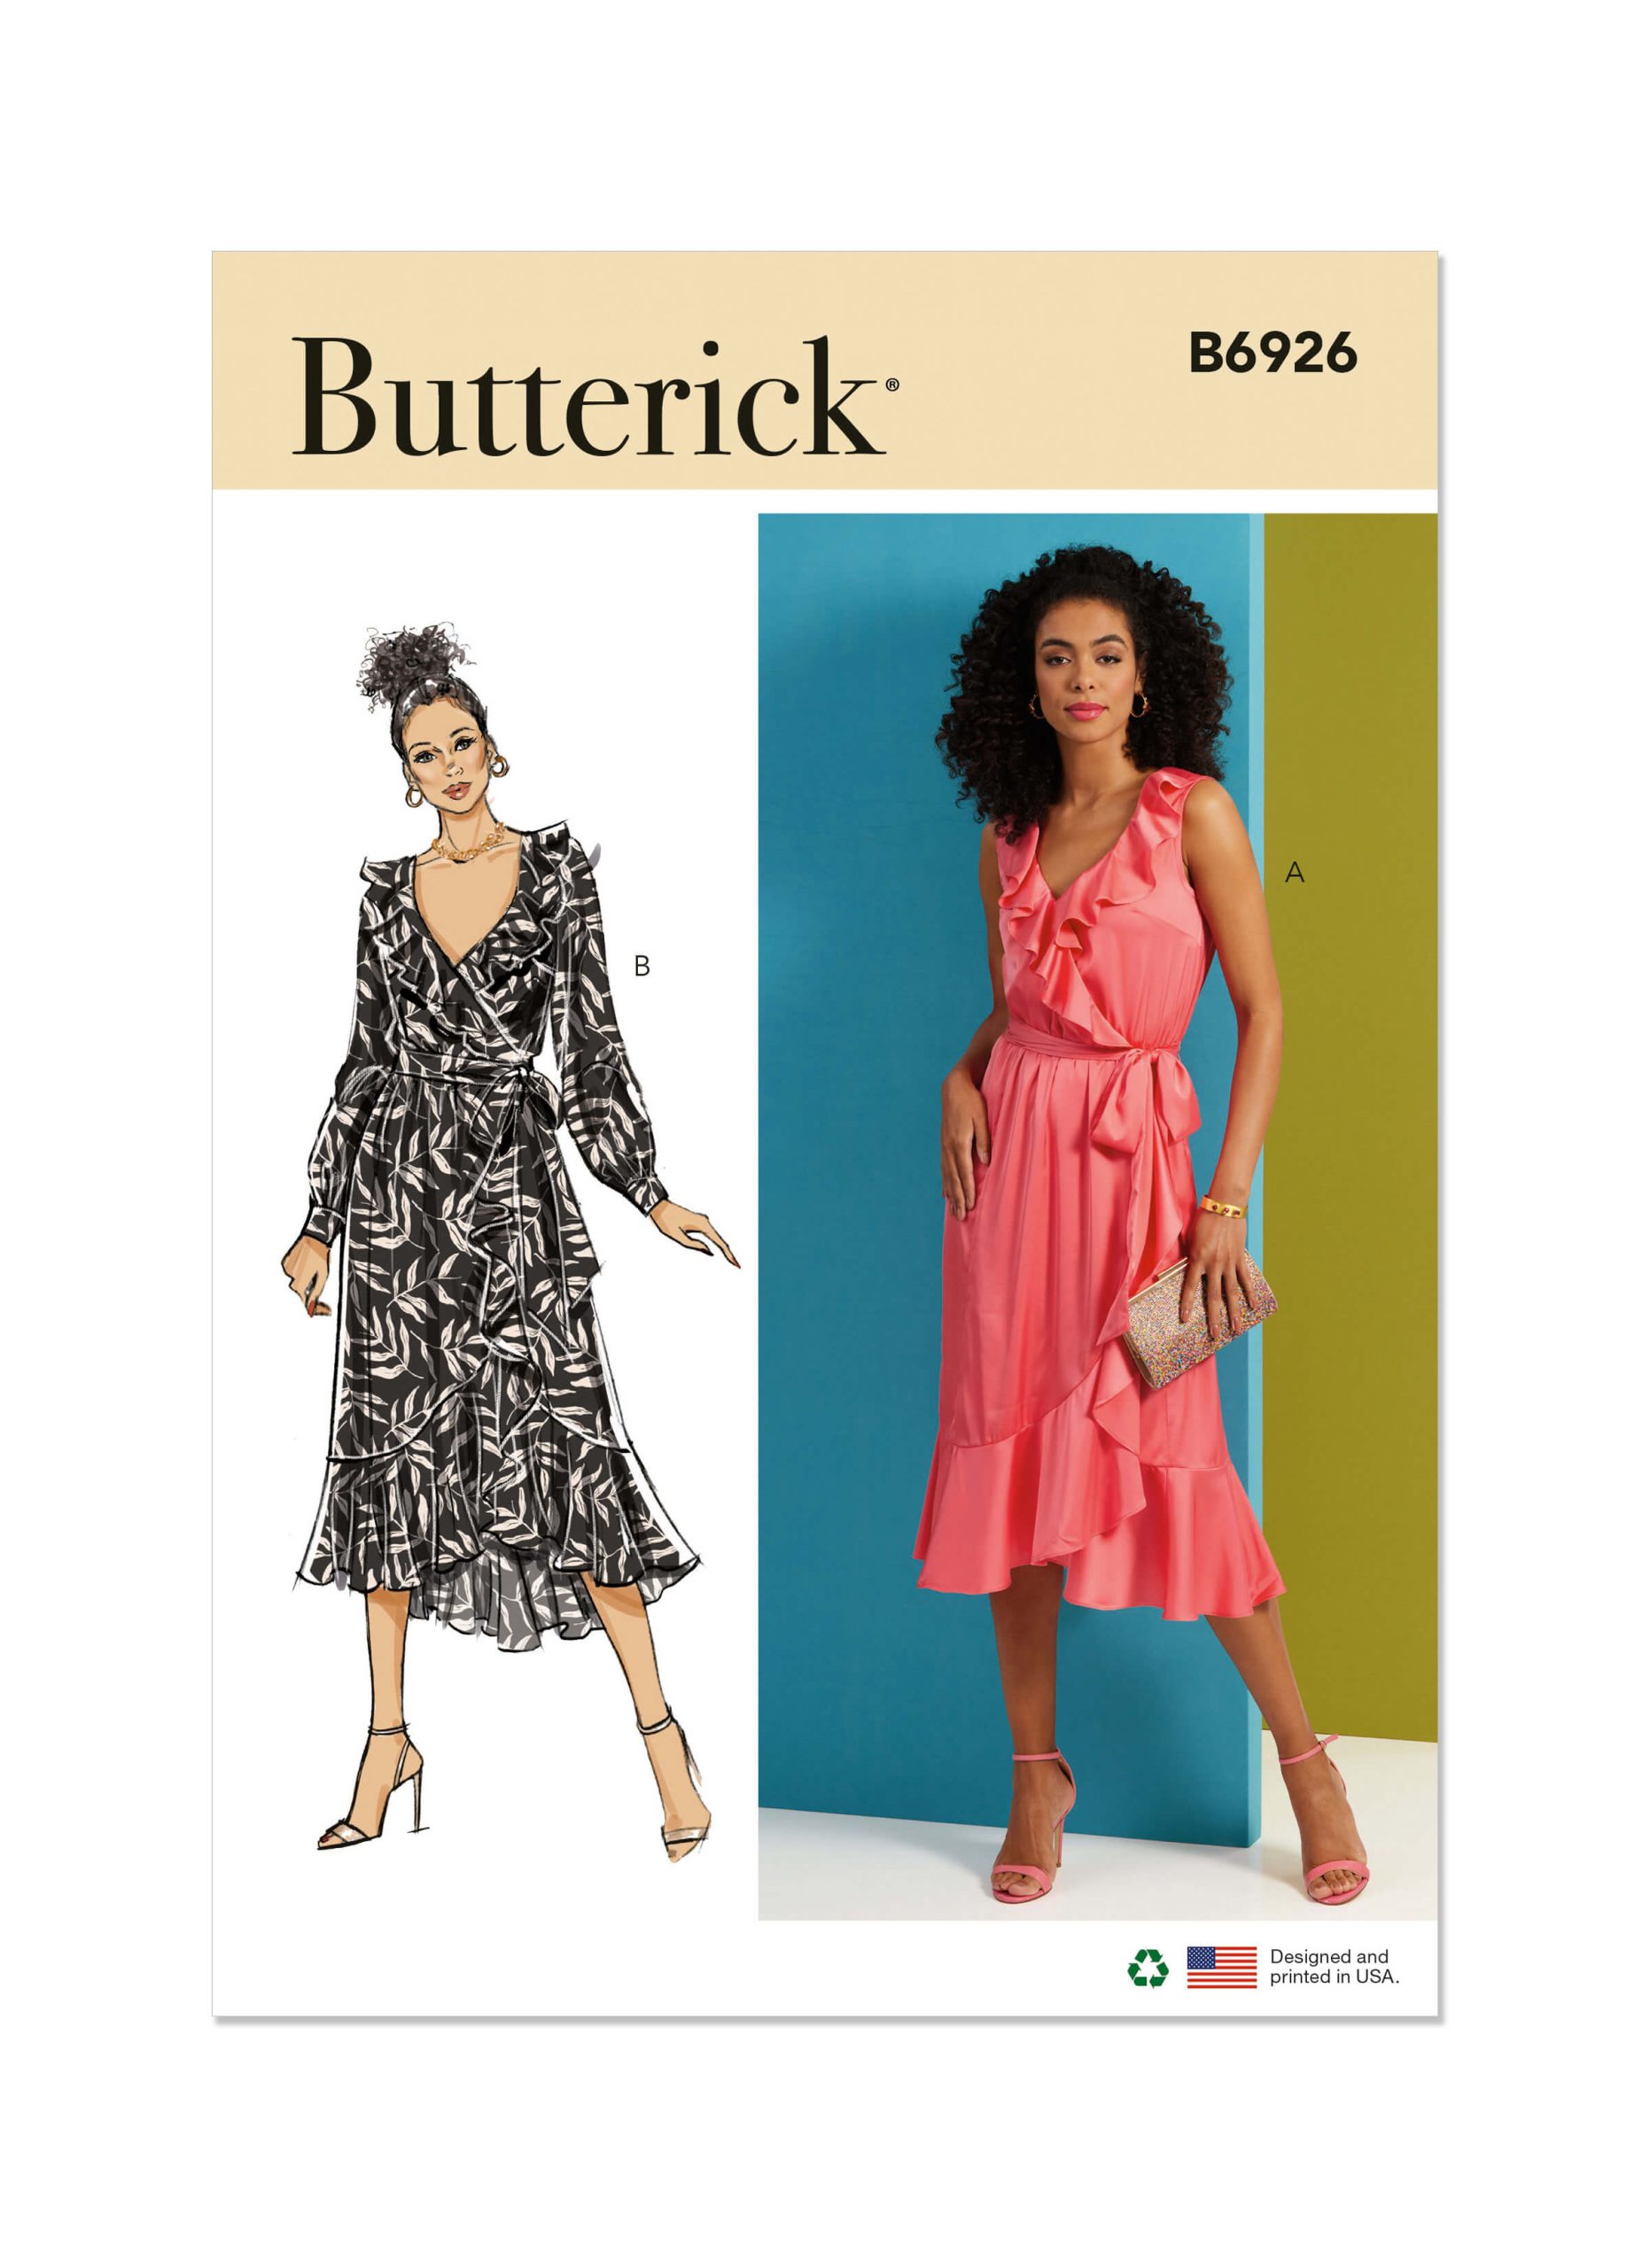 Butterick Sewing Pattern B6926 Misses' Dress and Sash